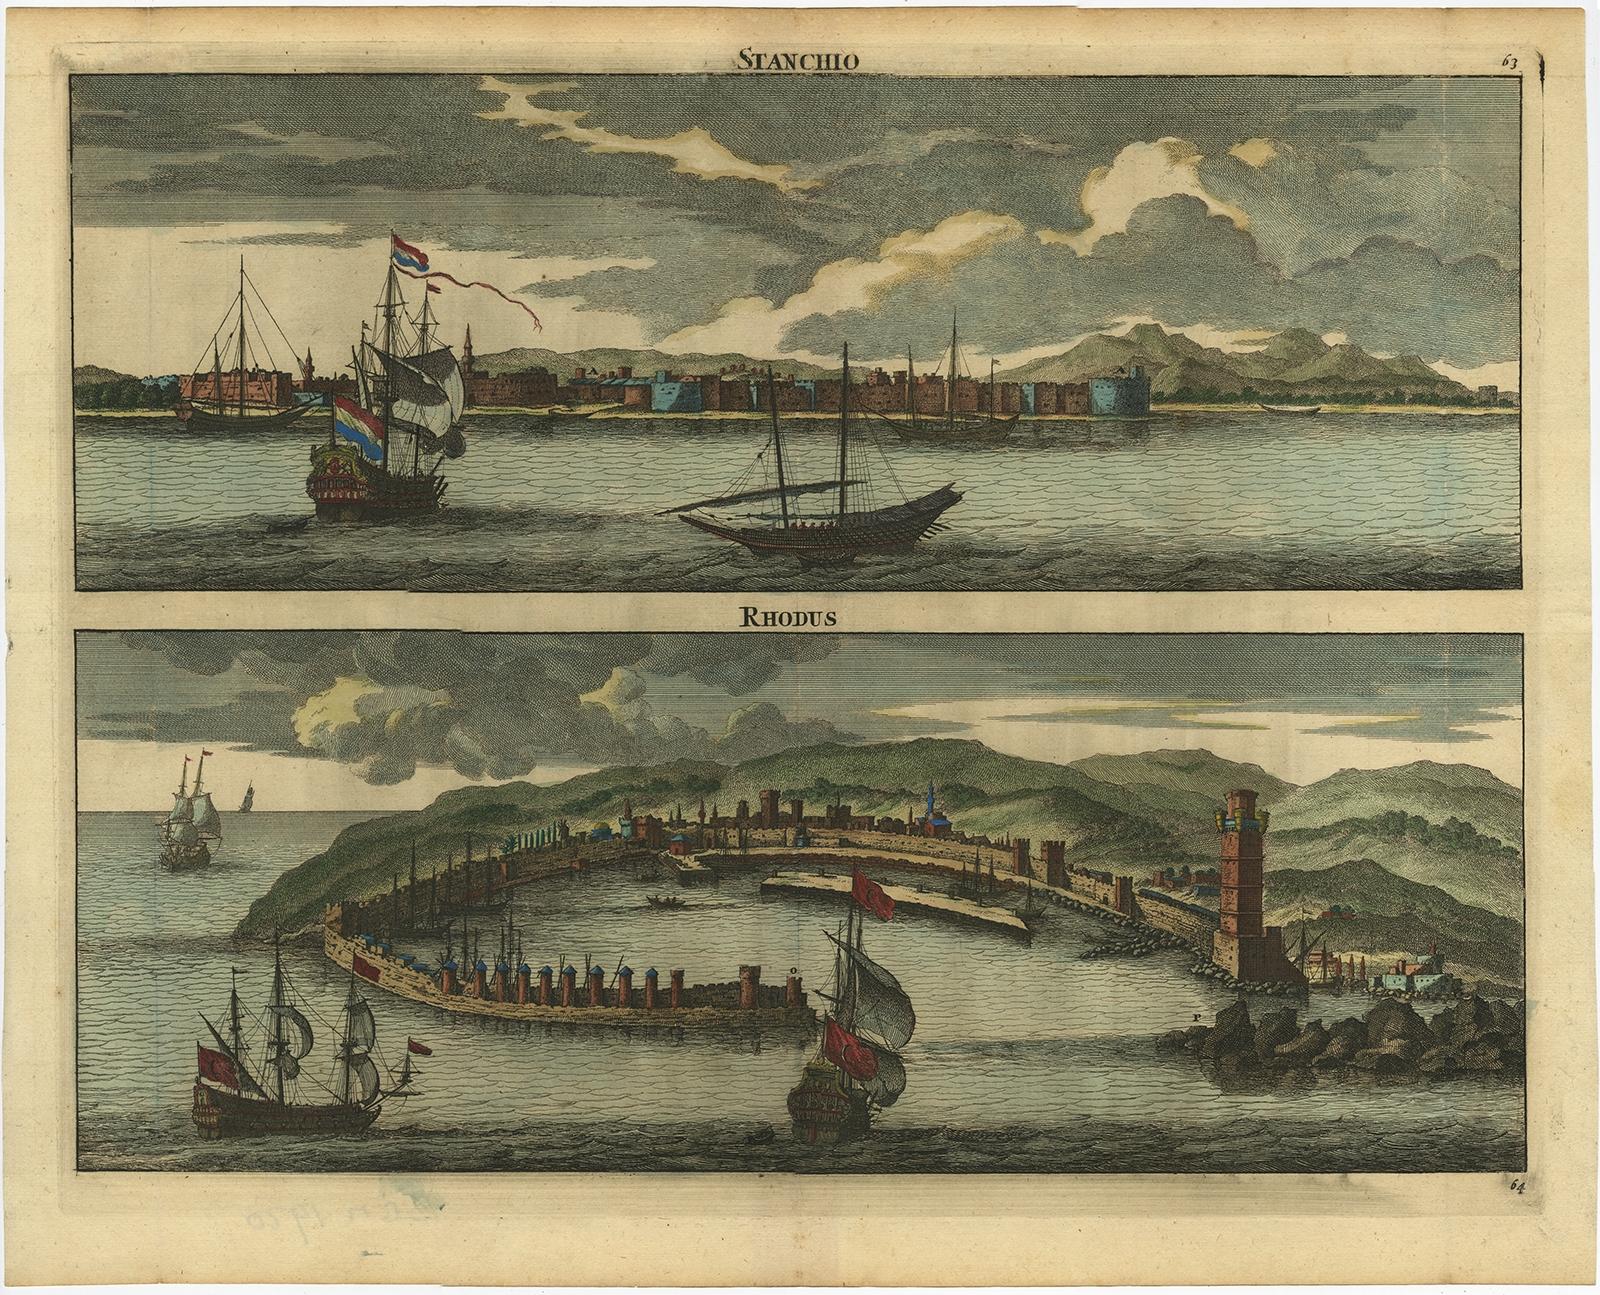 Antique print titled Stanchio Rhodus. 

Original antique print showing panoramic views of Stanchio, Greece and the Island of Rhodes, both with ships. 

 First edition in French, first published in Dutch in 1698 (Reizen door de vermaardste Deelen